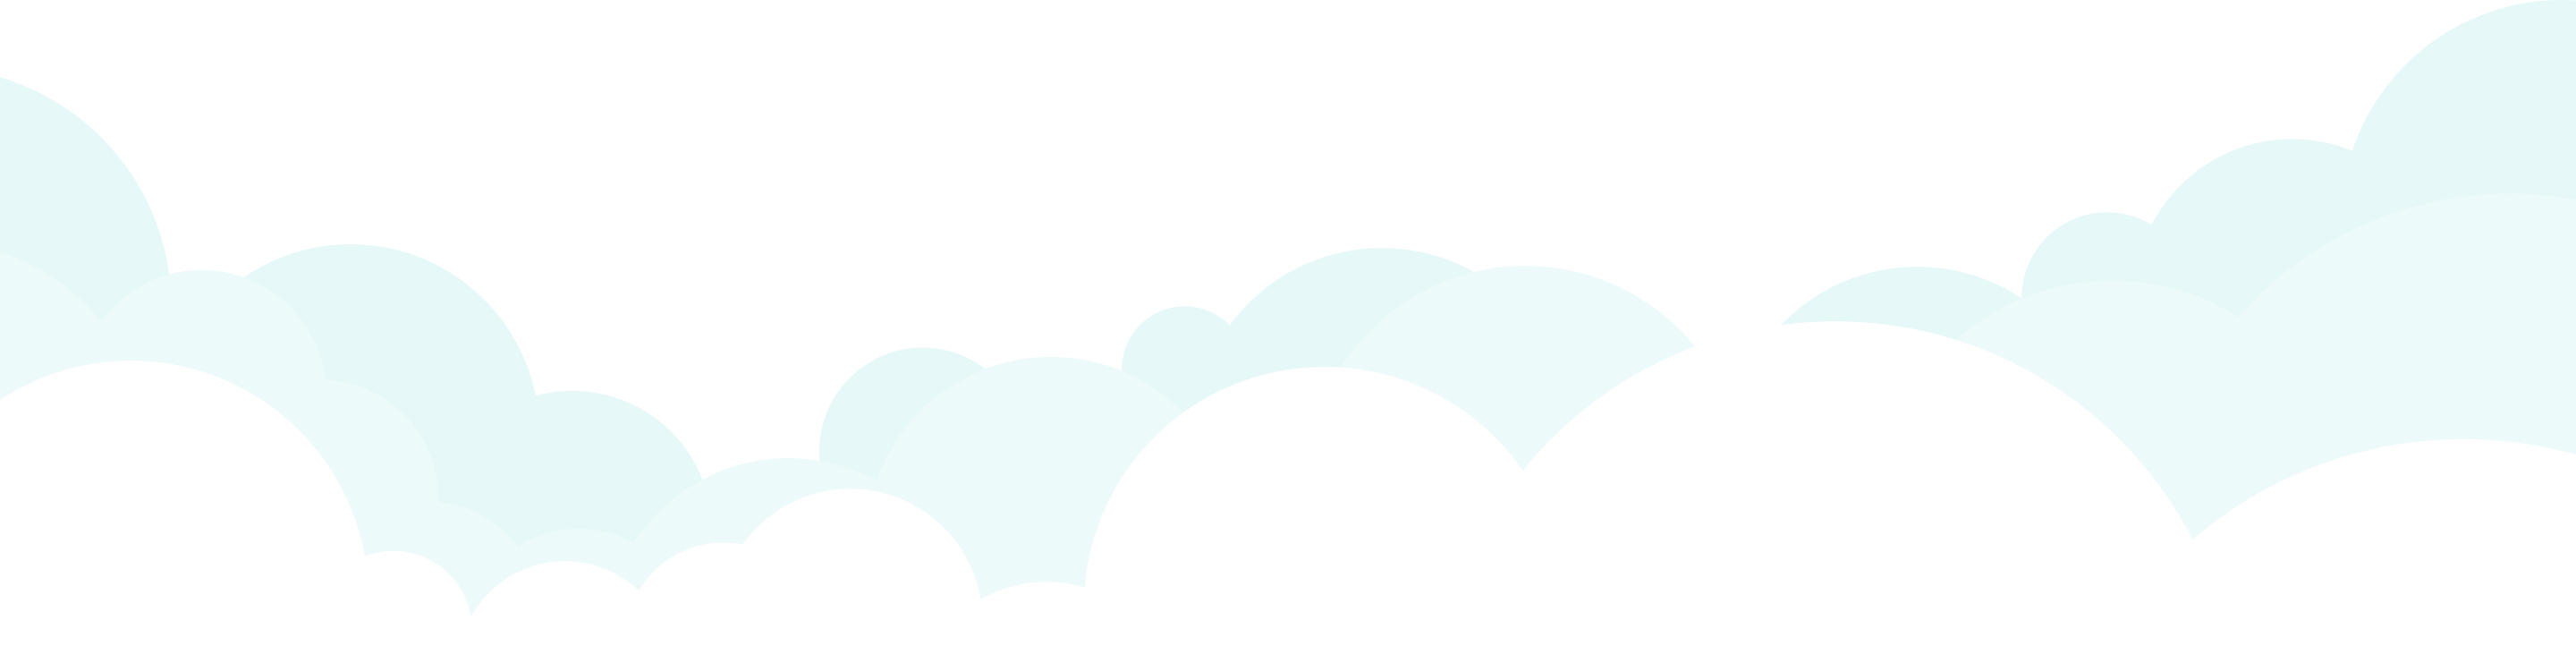 clouds background